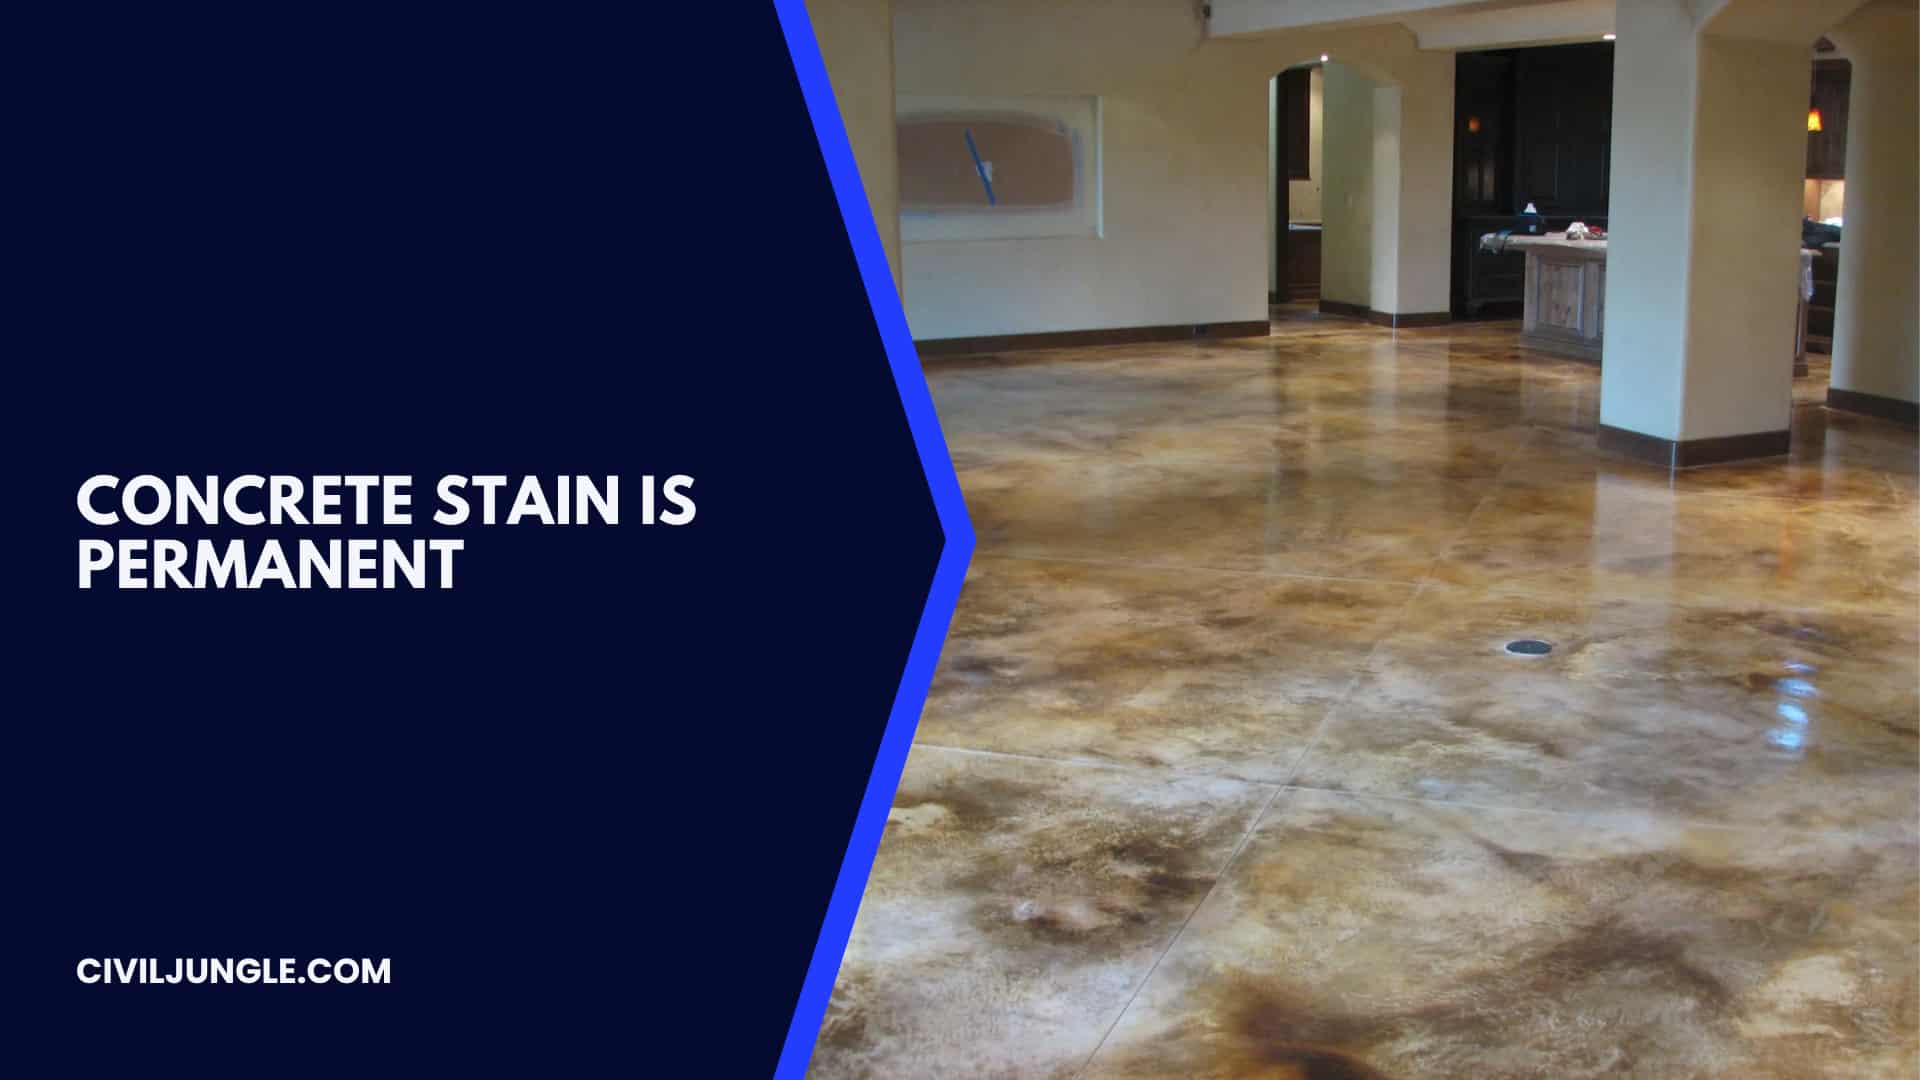 Concrete Stain Is Permanent